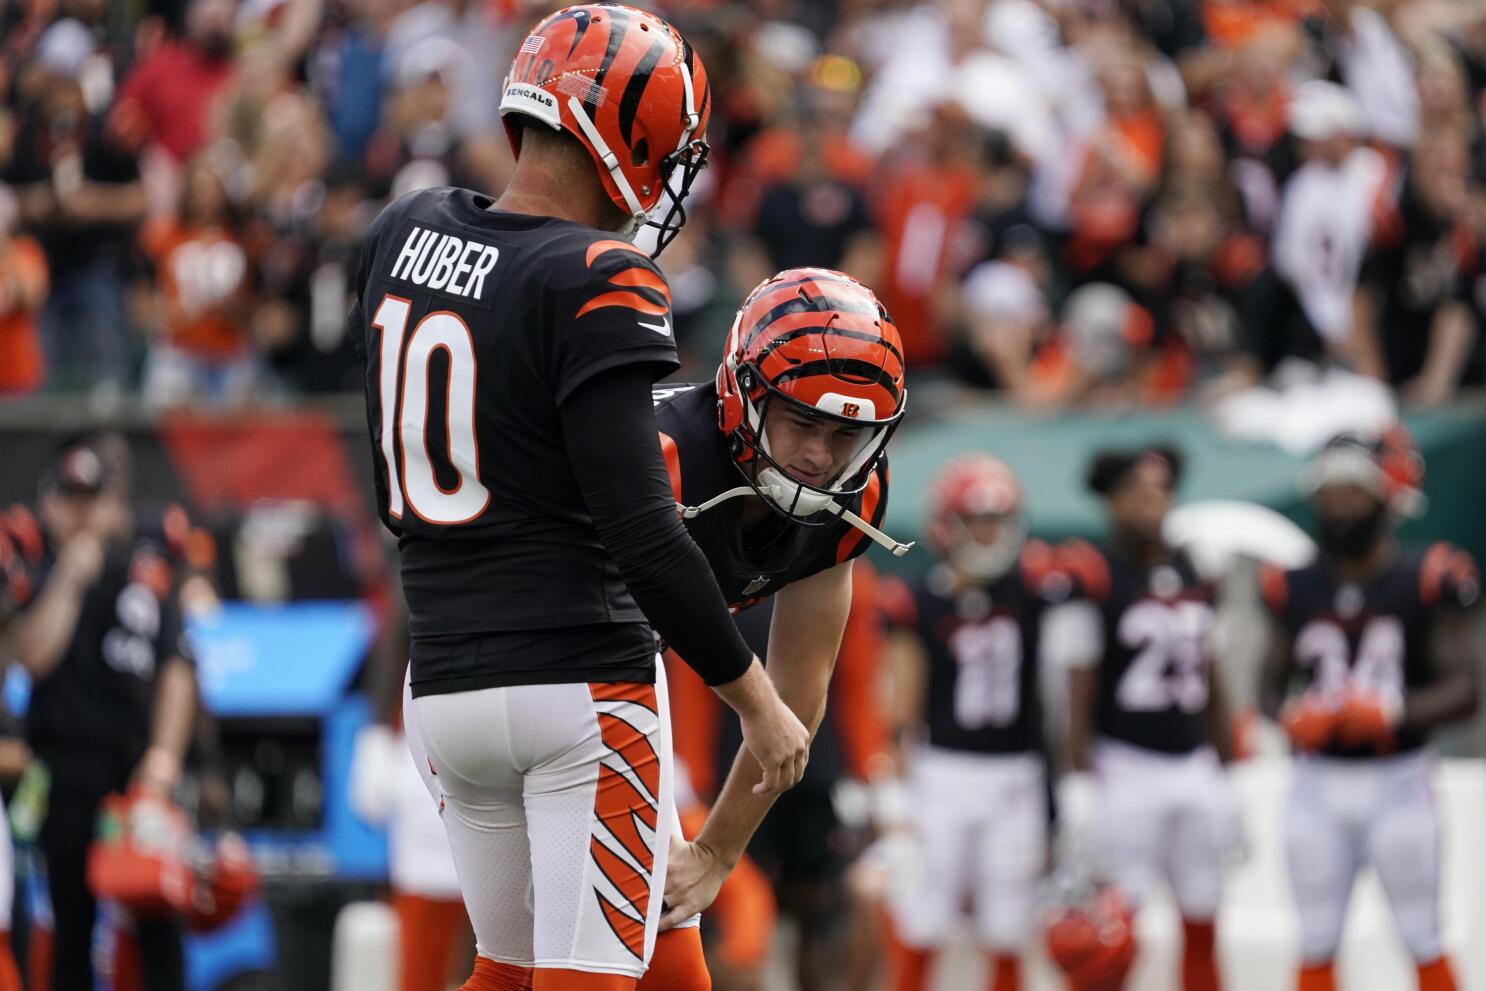 Thumbs down: Bengals' Zac Taylor gets a little too cute with play calls